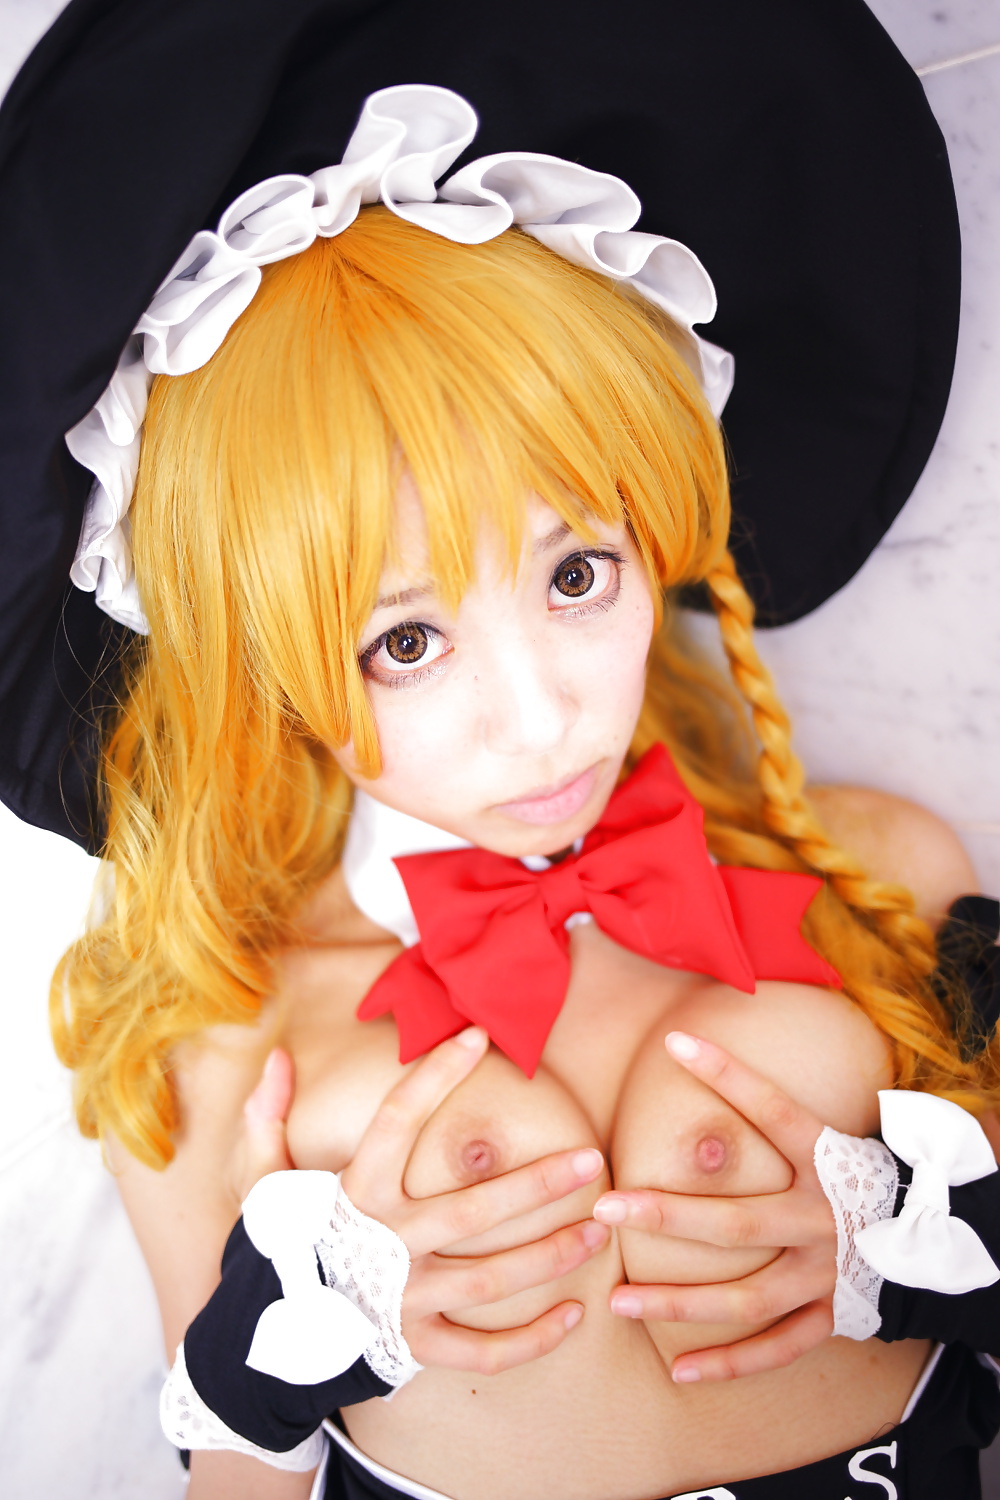 Giapponese amore saotome ero cosplay finale
 #30477262